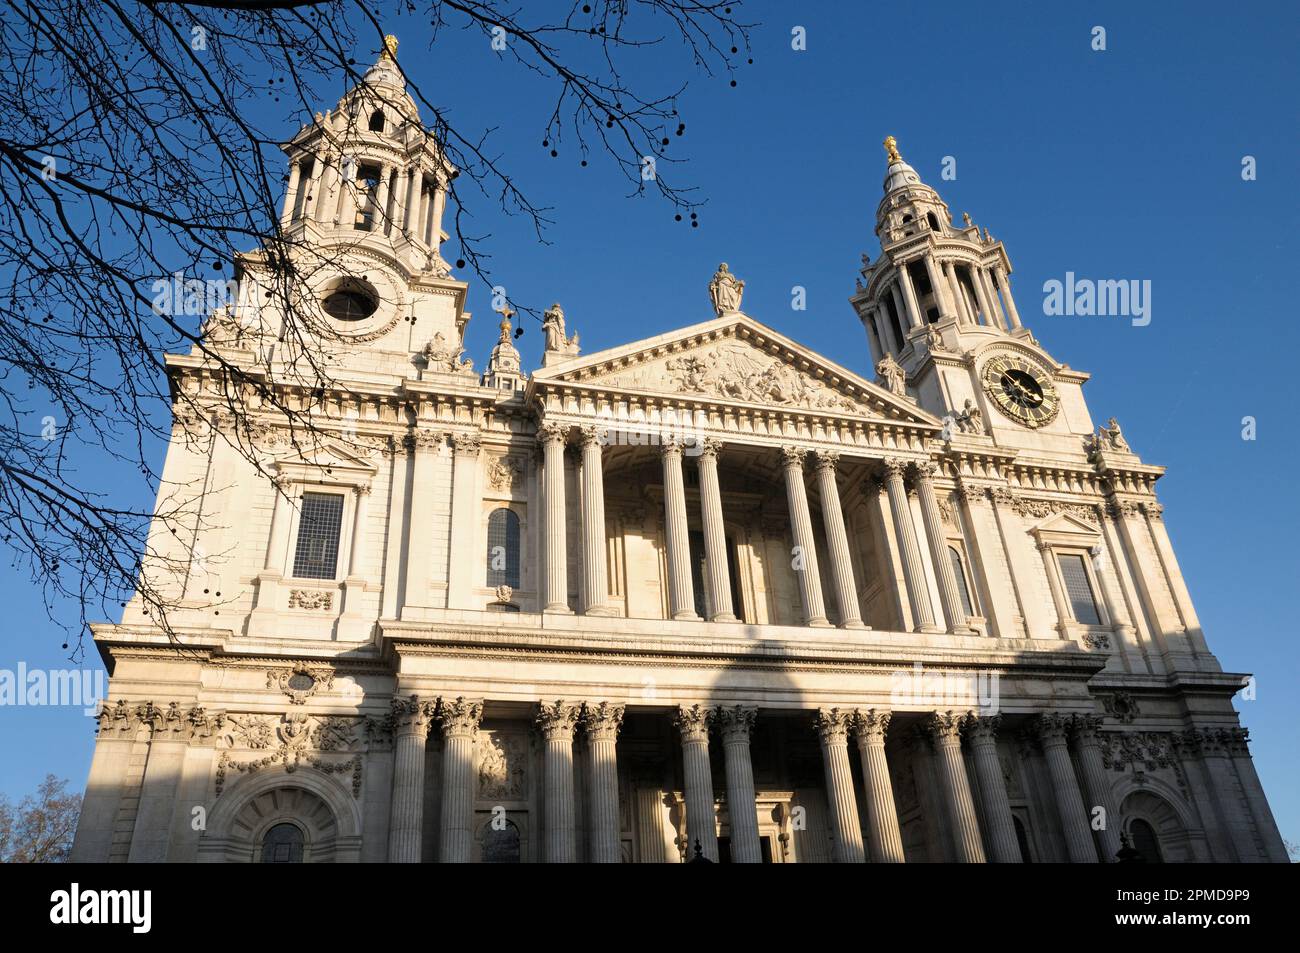 West Front elevation bell towers and entrance to the iconic St Paul's Cathedral, London, England, UK.  Architect:  Sir Christopher Wren (1632-1723) Stock Photo